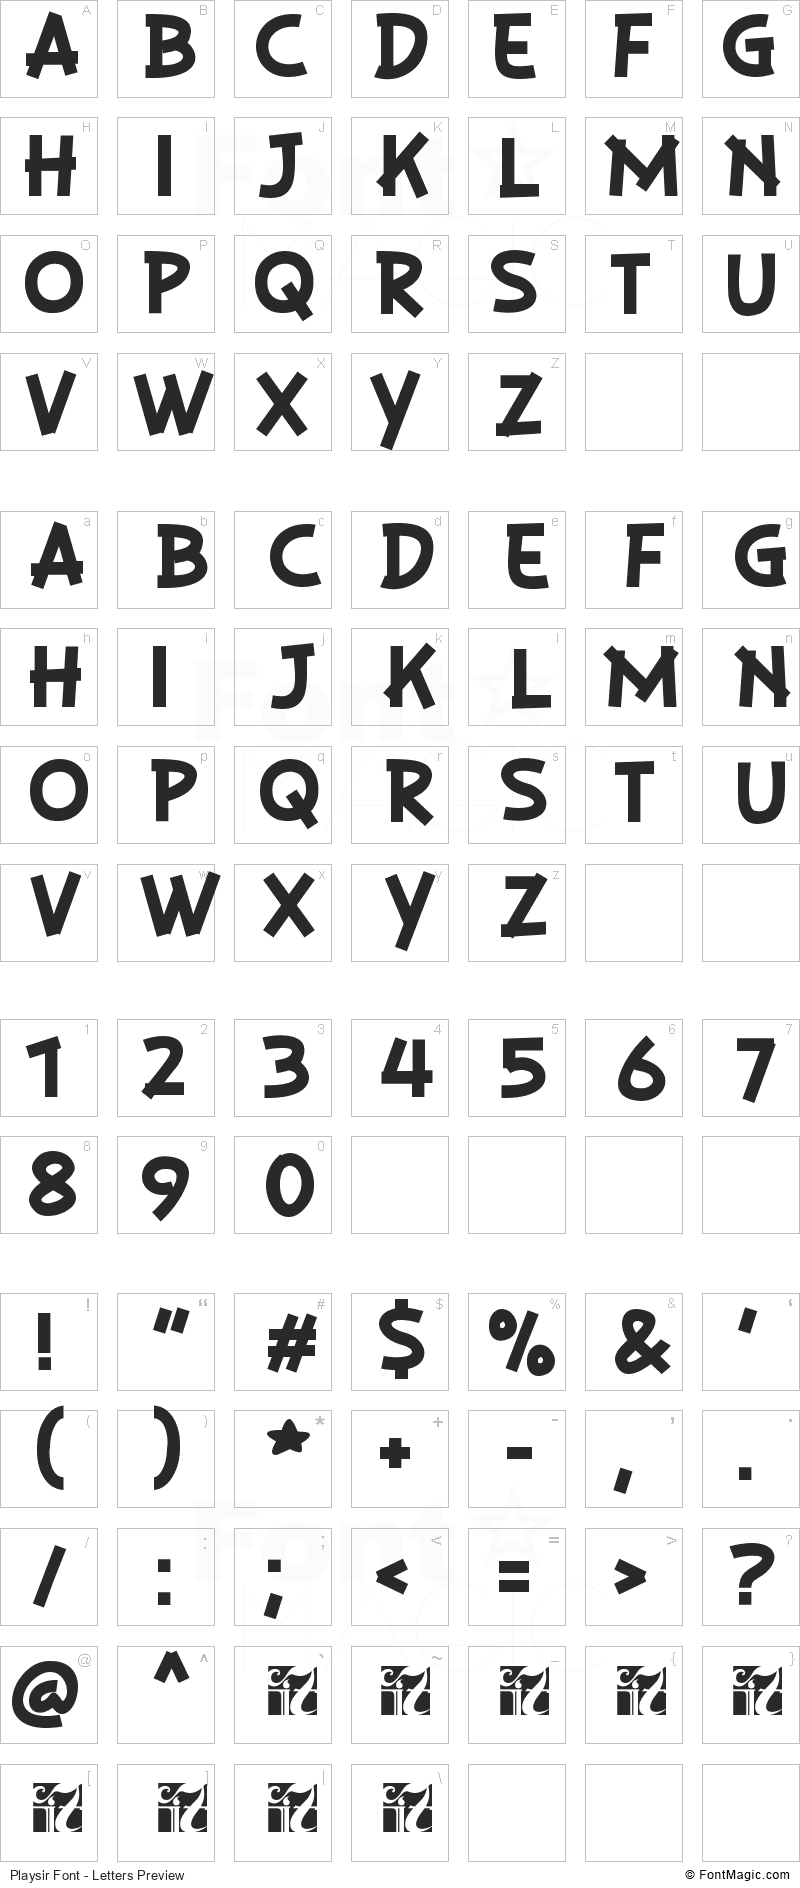 Playsir Font - All Latters Preview Chart